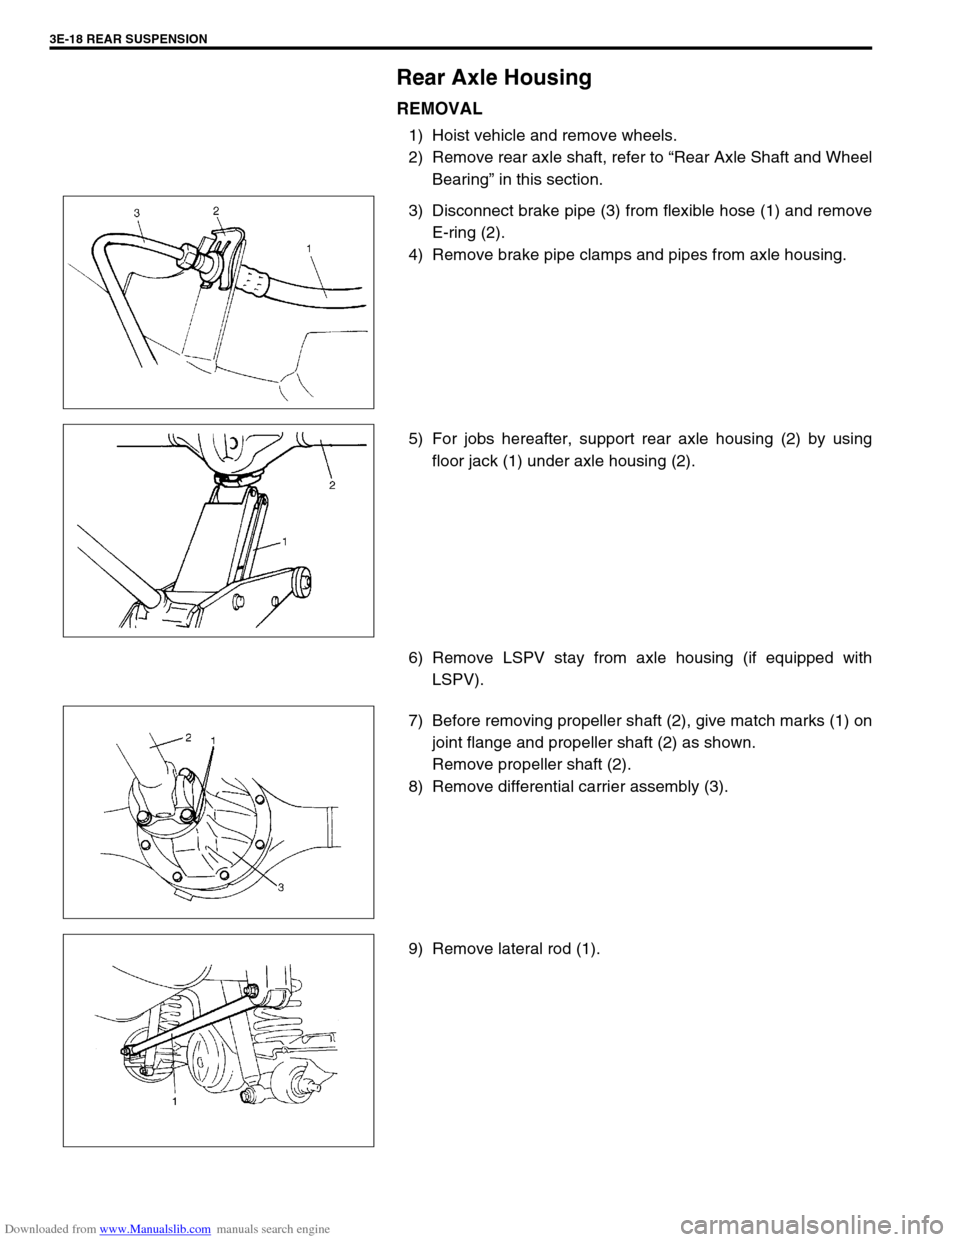 SUZUKI JIMNY 2005 3.G Service Workshop Manual Downloaded from www.Manualslib.com manuals search engine 3E-18 REAR SUSPENSION
Rear Axle Housing
REMOVAL
1) Hoist vehicle and remove wheels.
2) Remove rear axle shaft, refer to “Rear Axle Shaft and 